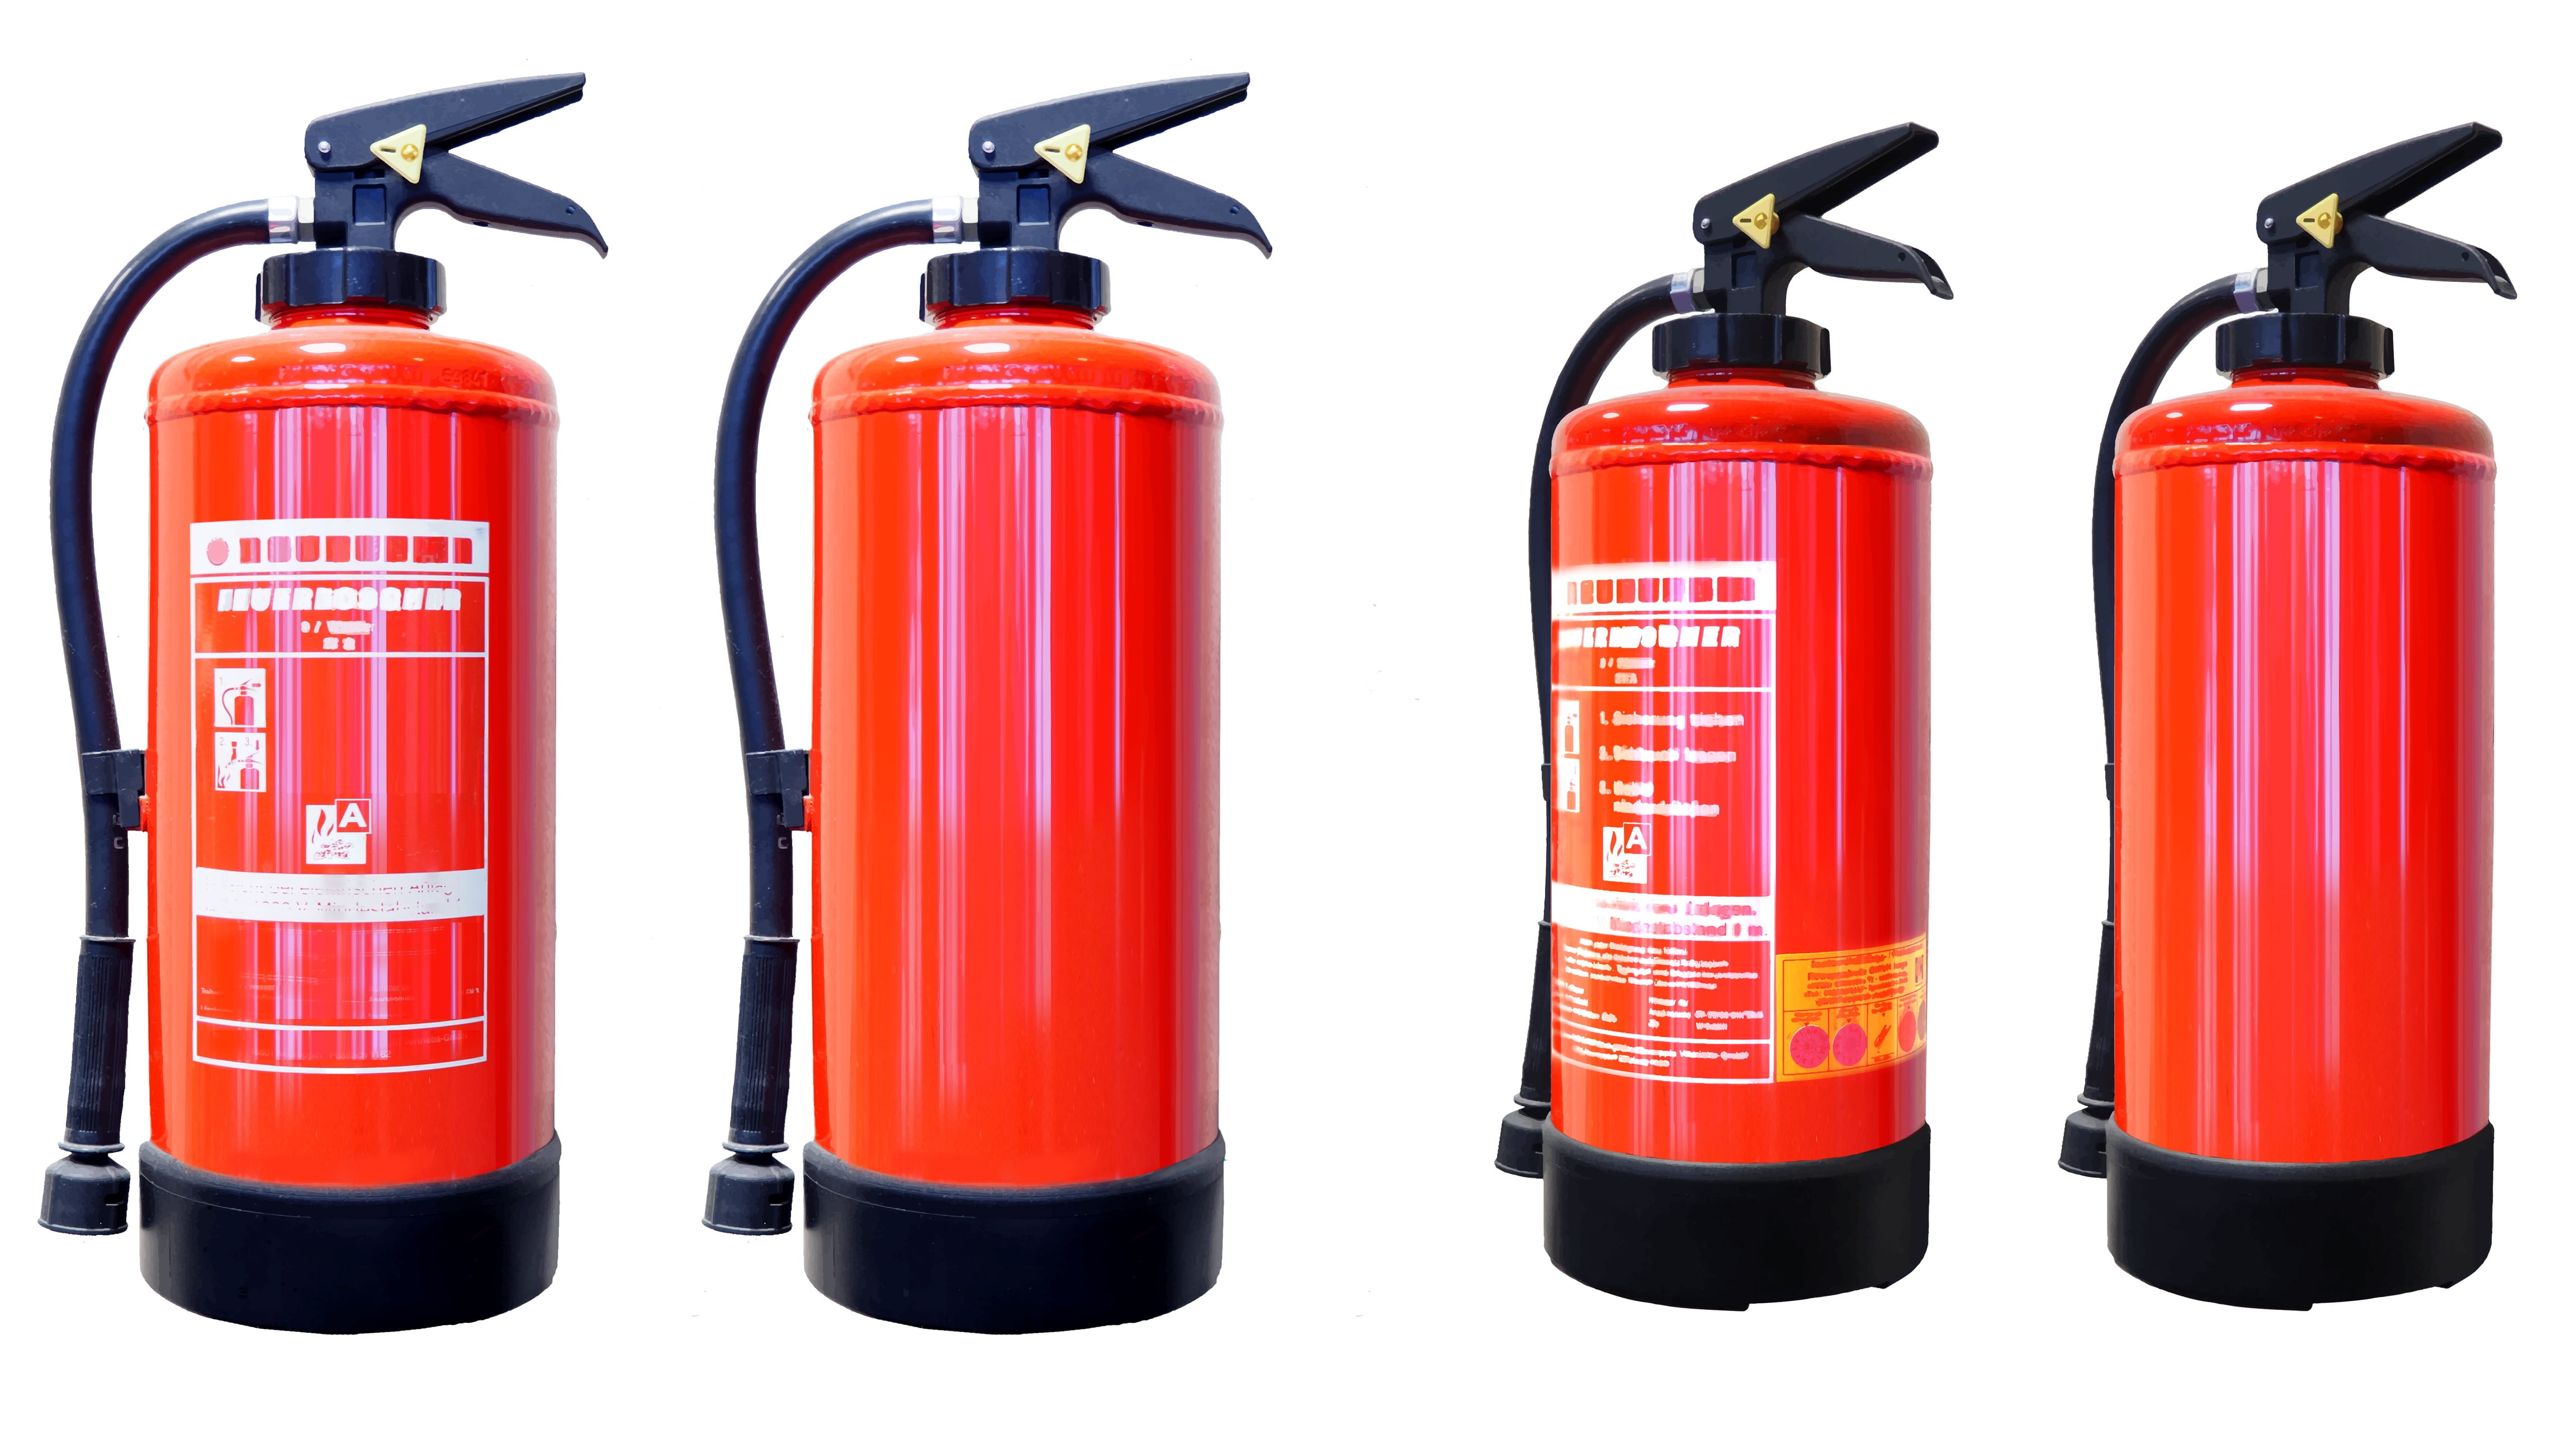 petrol, equipment, fire extinguisher, fuel, container, chemical